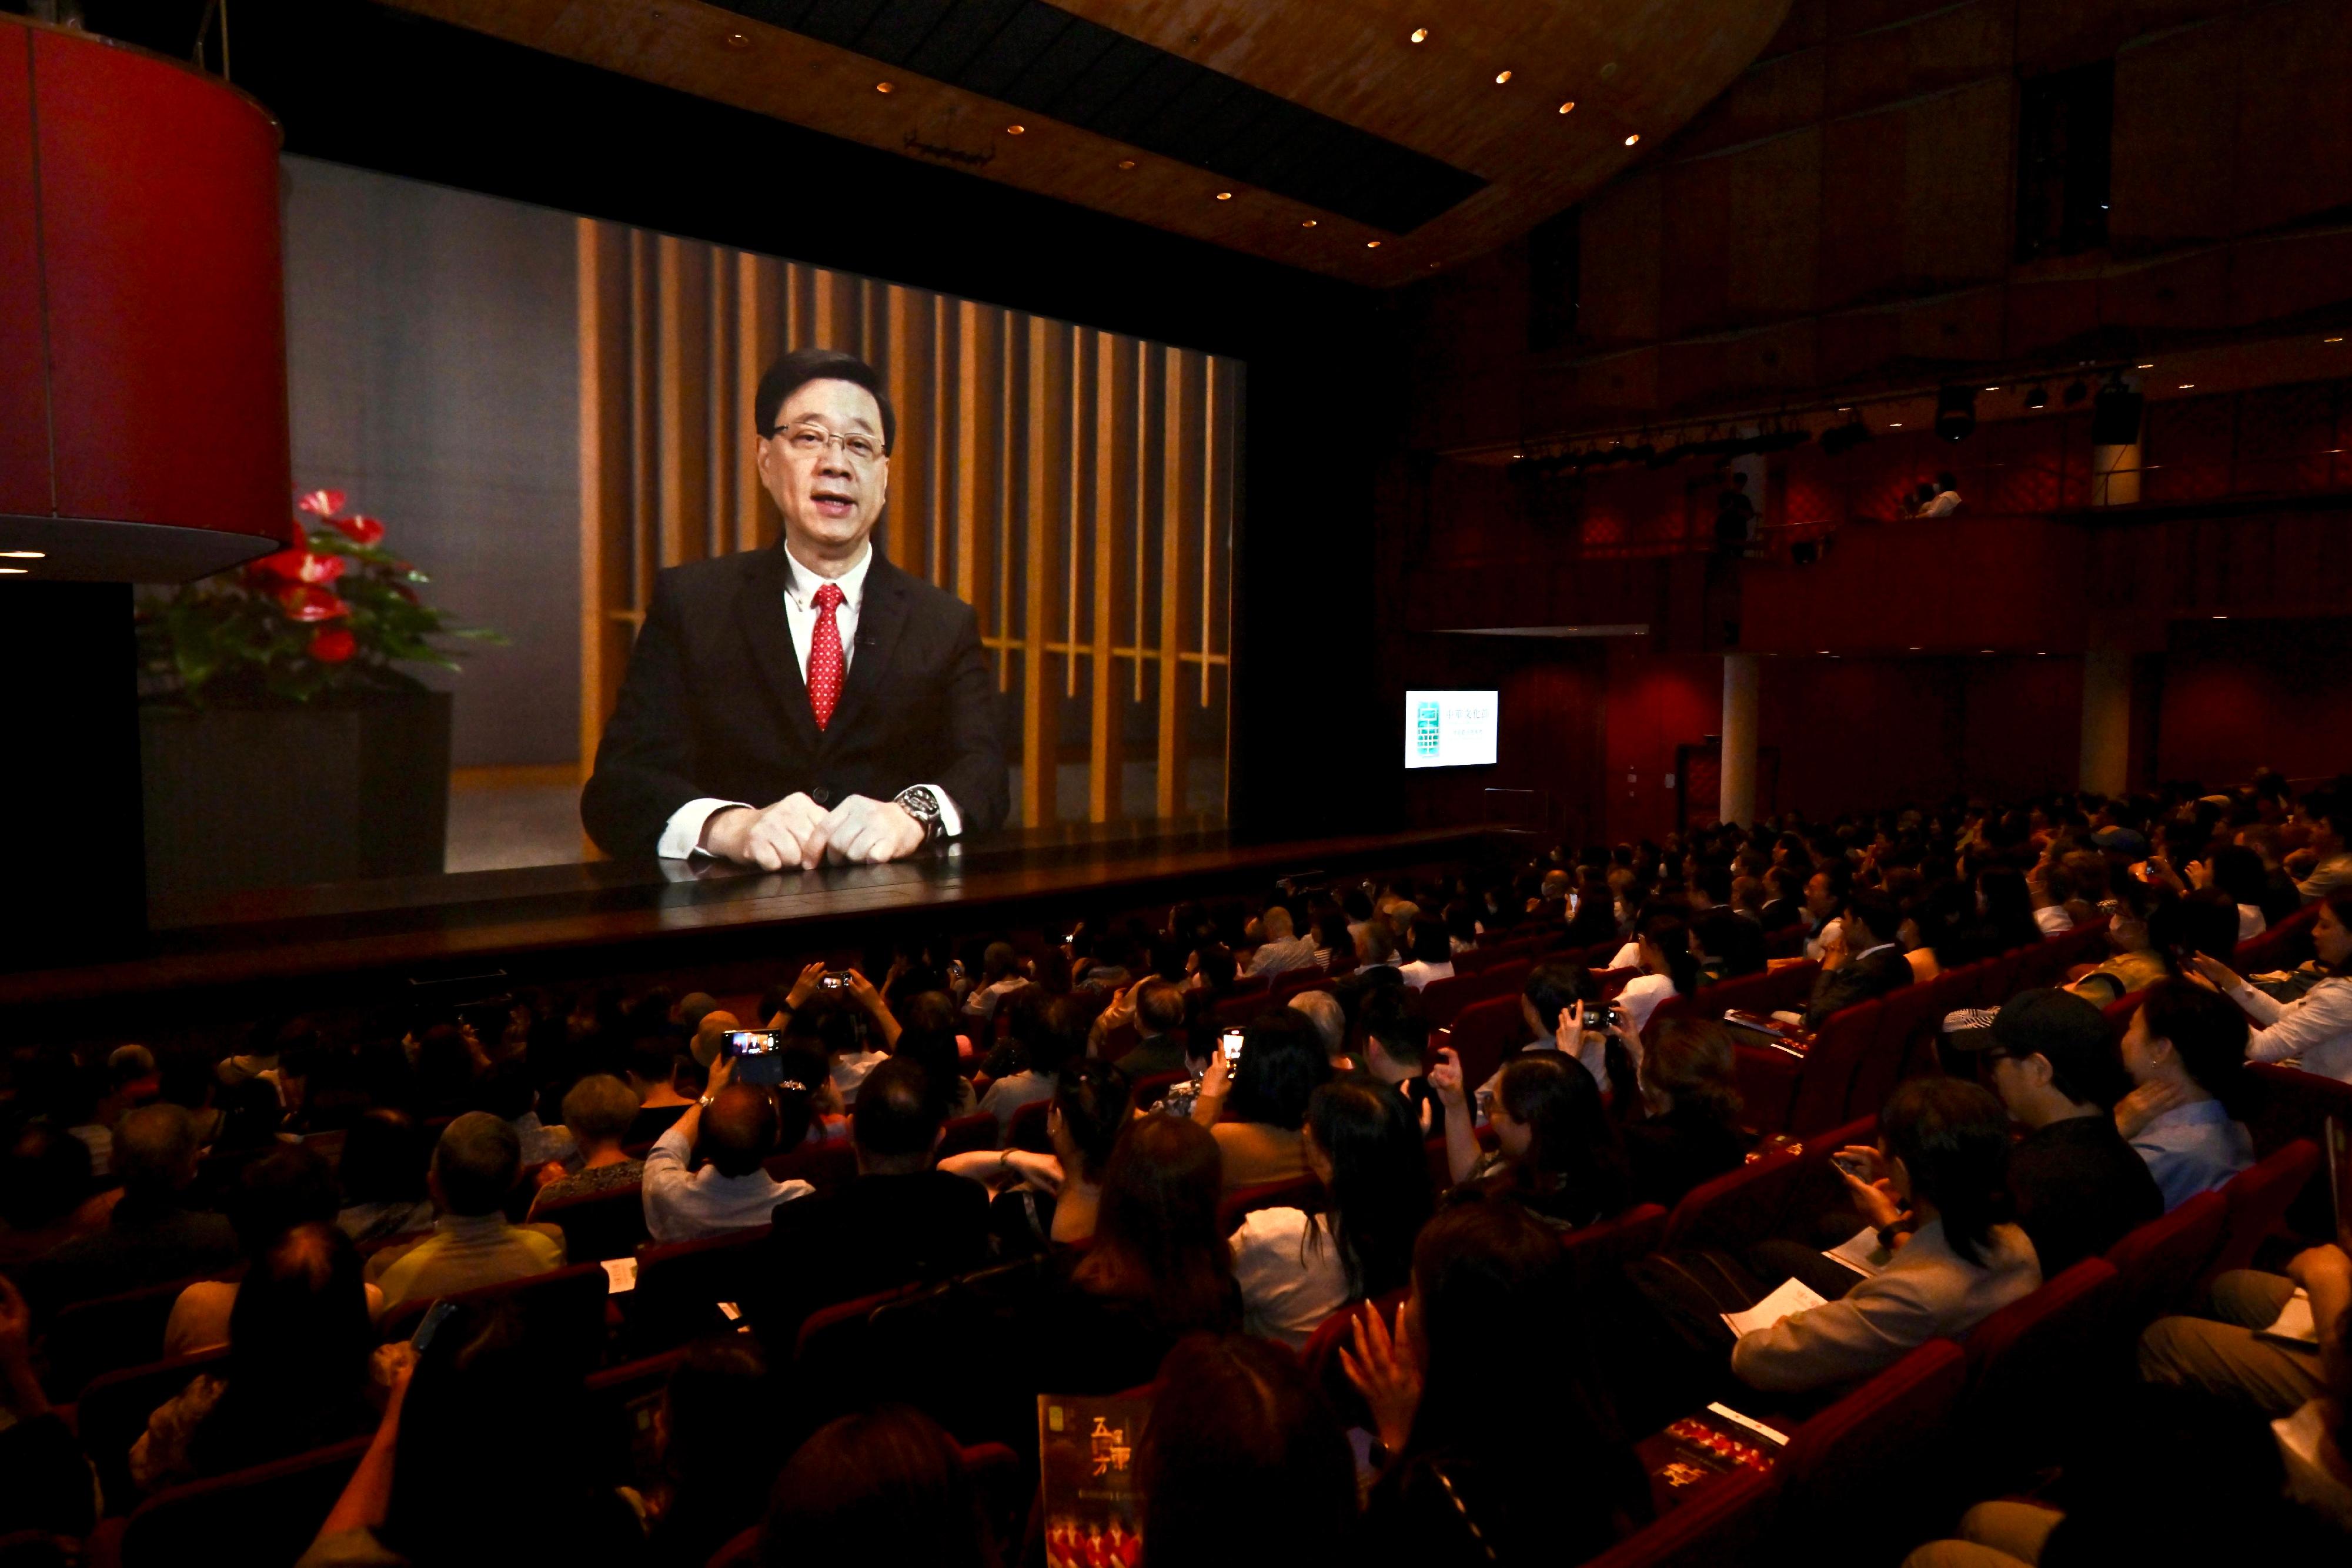 The inaugural Chinese Culture Festival, presented by the Culture, Sports and Tourism Bureau and organised by the Leisure and Cultural Services Department's Chinese Culture Promotion Office, kicked off today (June 7) at the Auditorium of the Sha Tin Town Hall. Photo shows the Chief Executive, Mr John Lee, delivering a video speech at the opening ceremony.